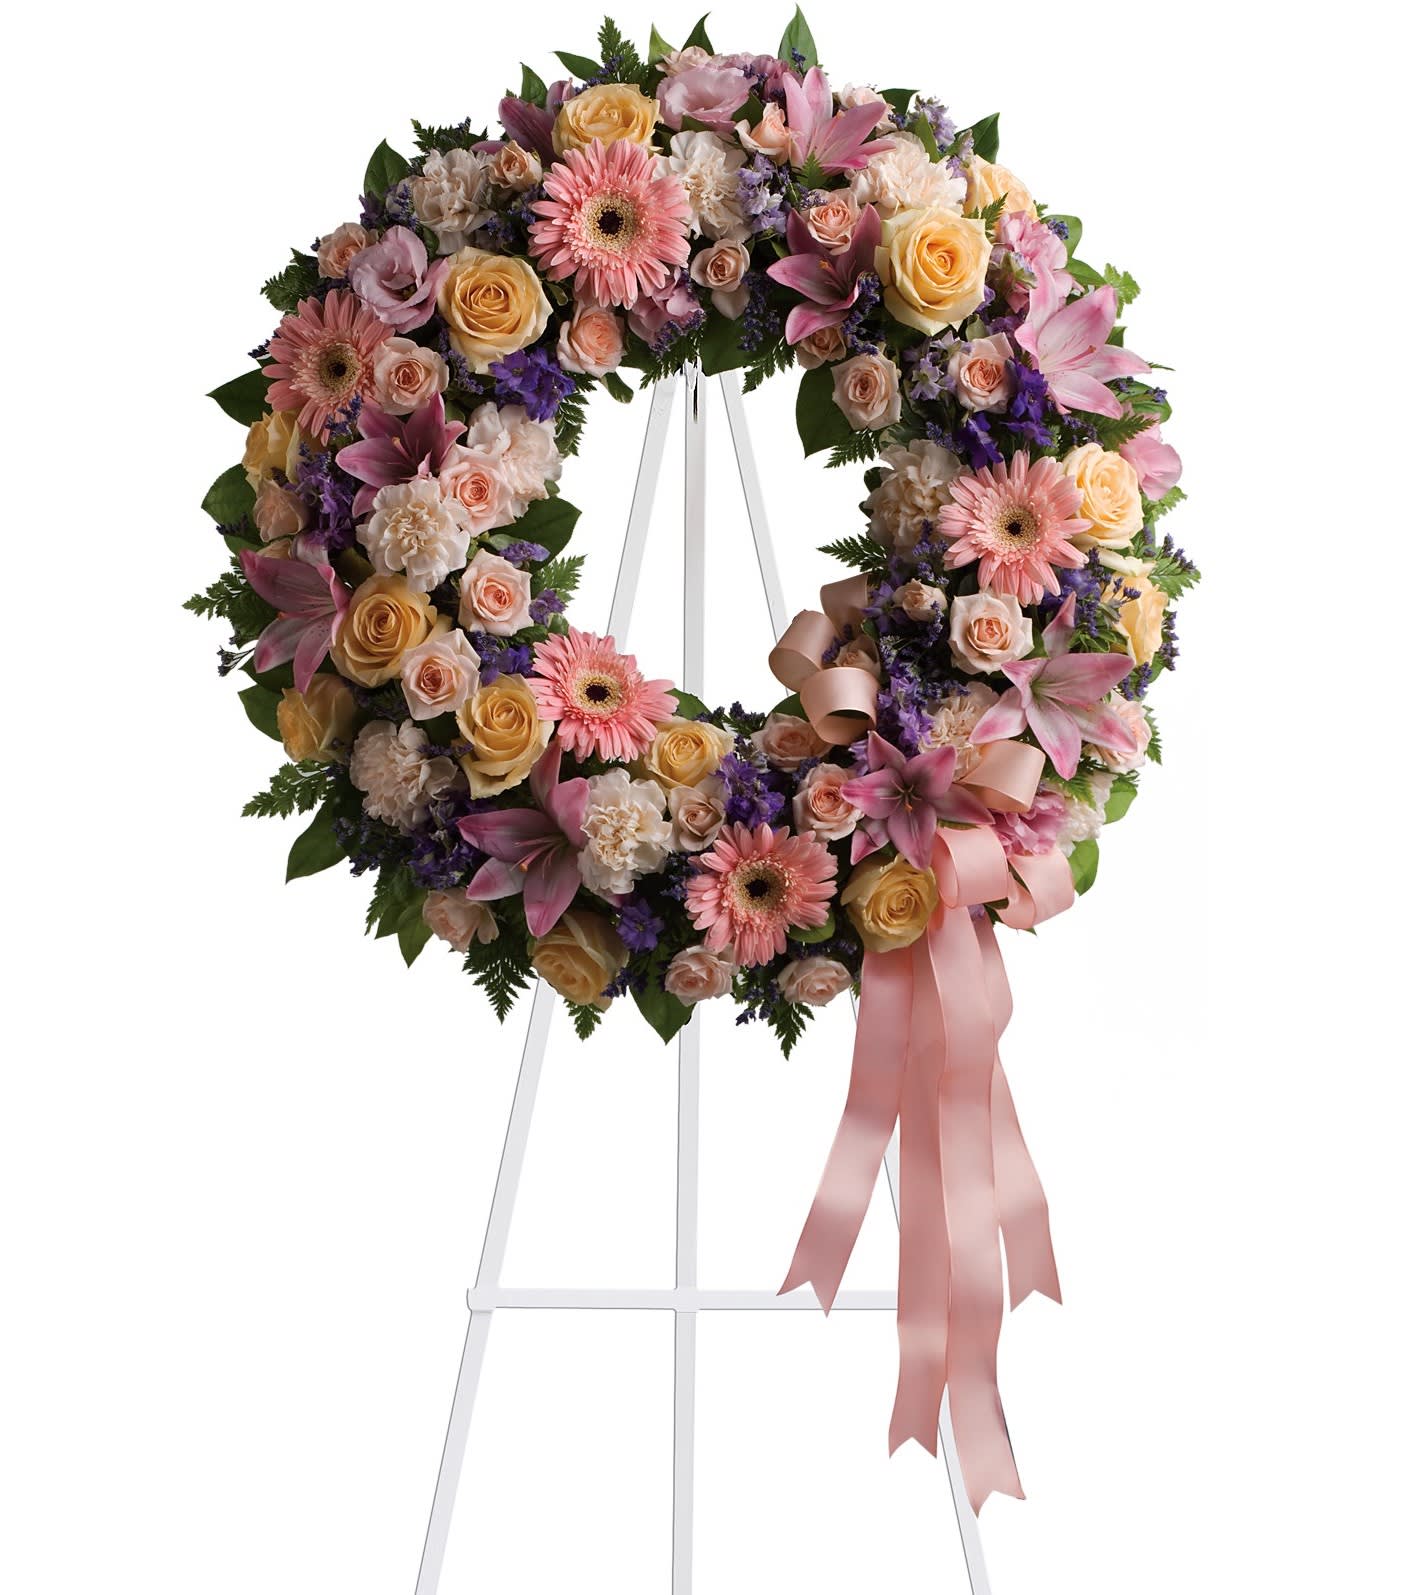 Graceful Wreath - Family and friends will recollect how special their loved one was with this gentle and timeless circle of fragrant blooms to celebrate sweet memories. 